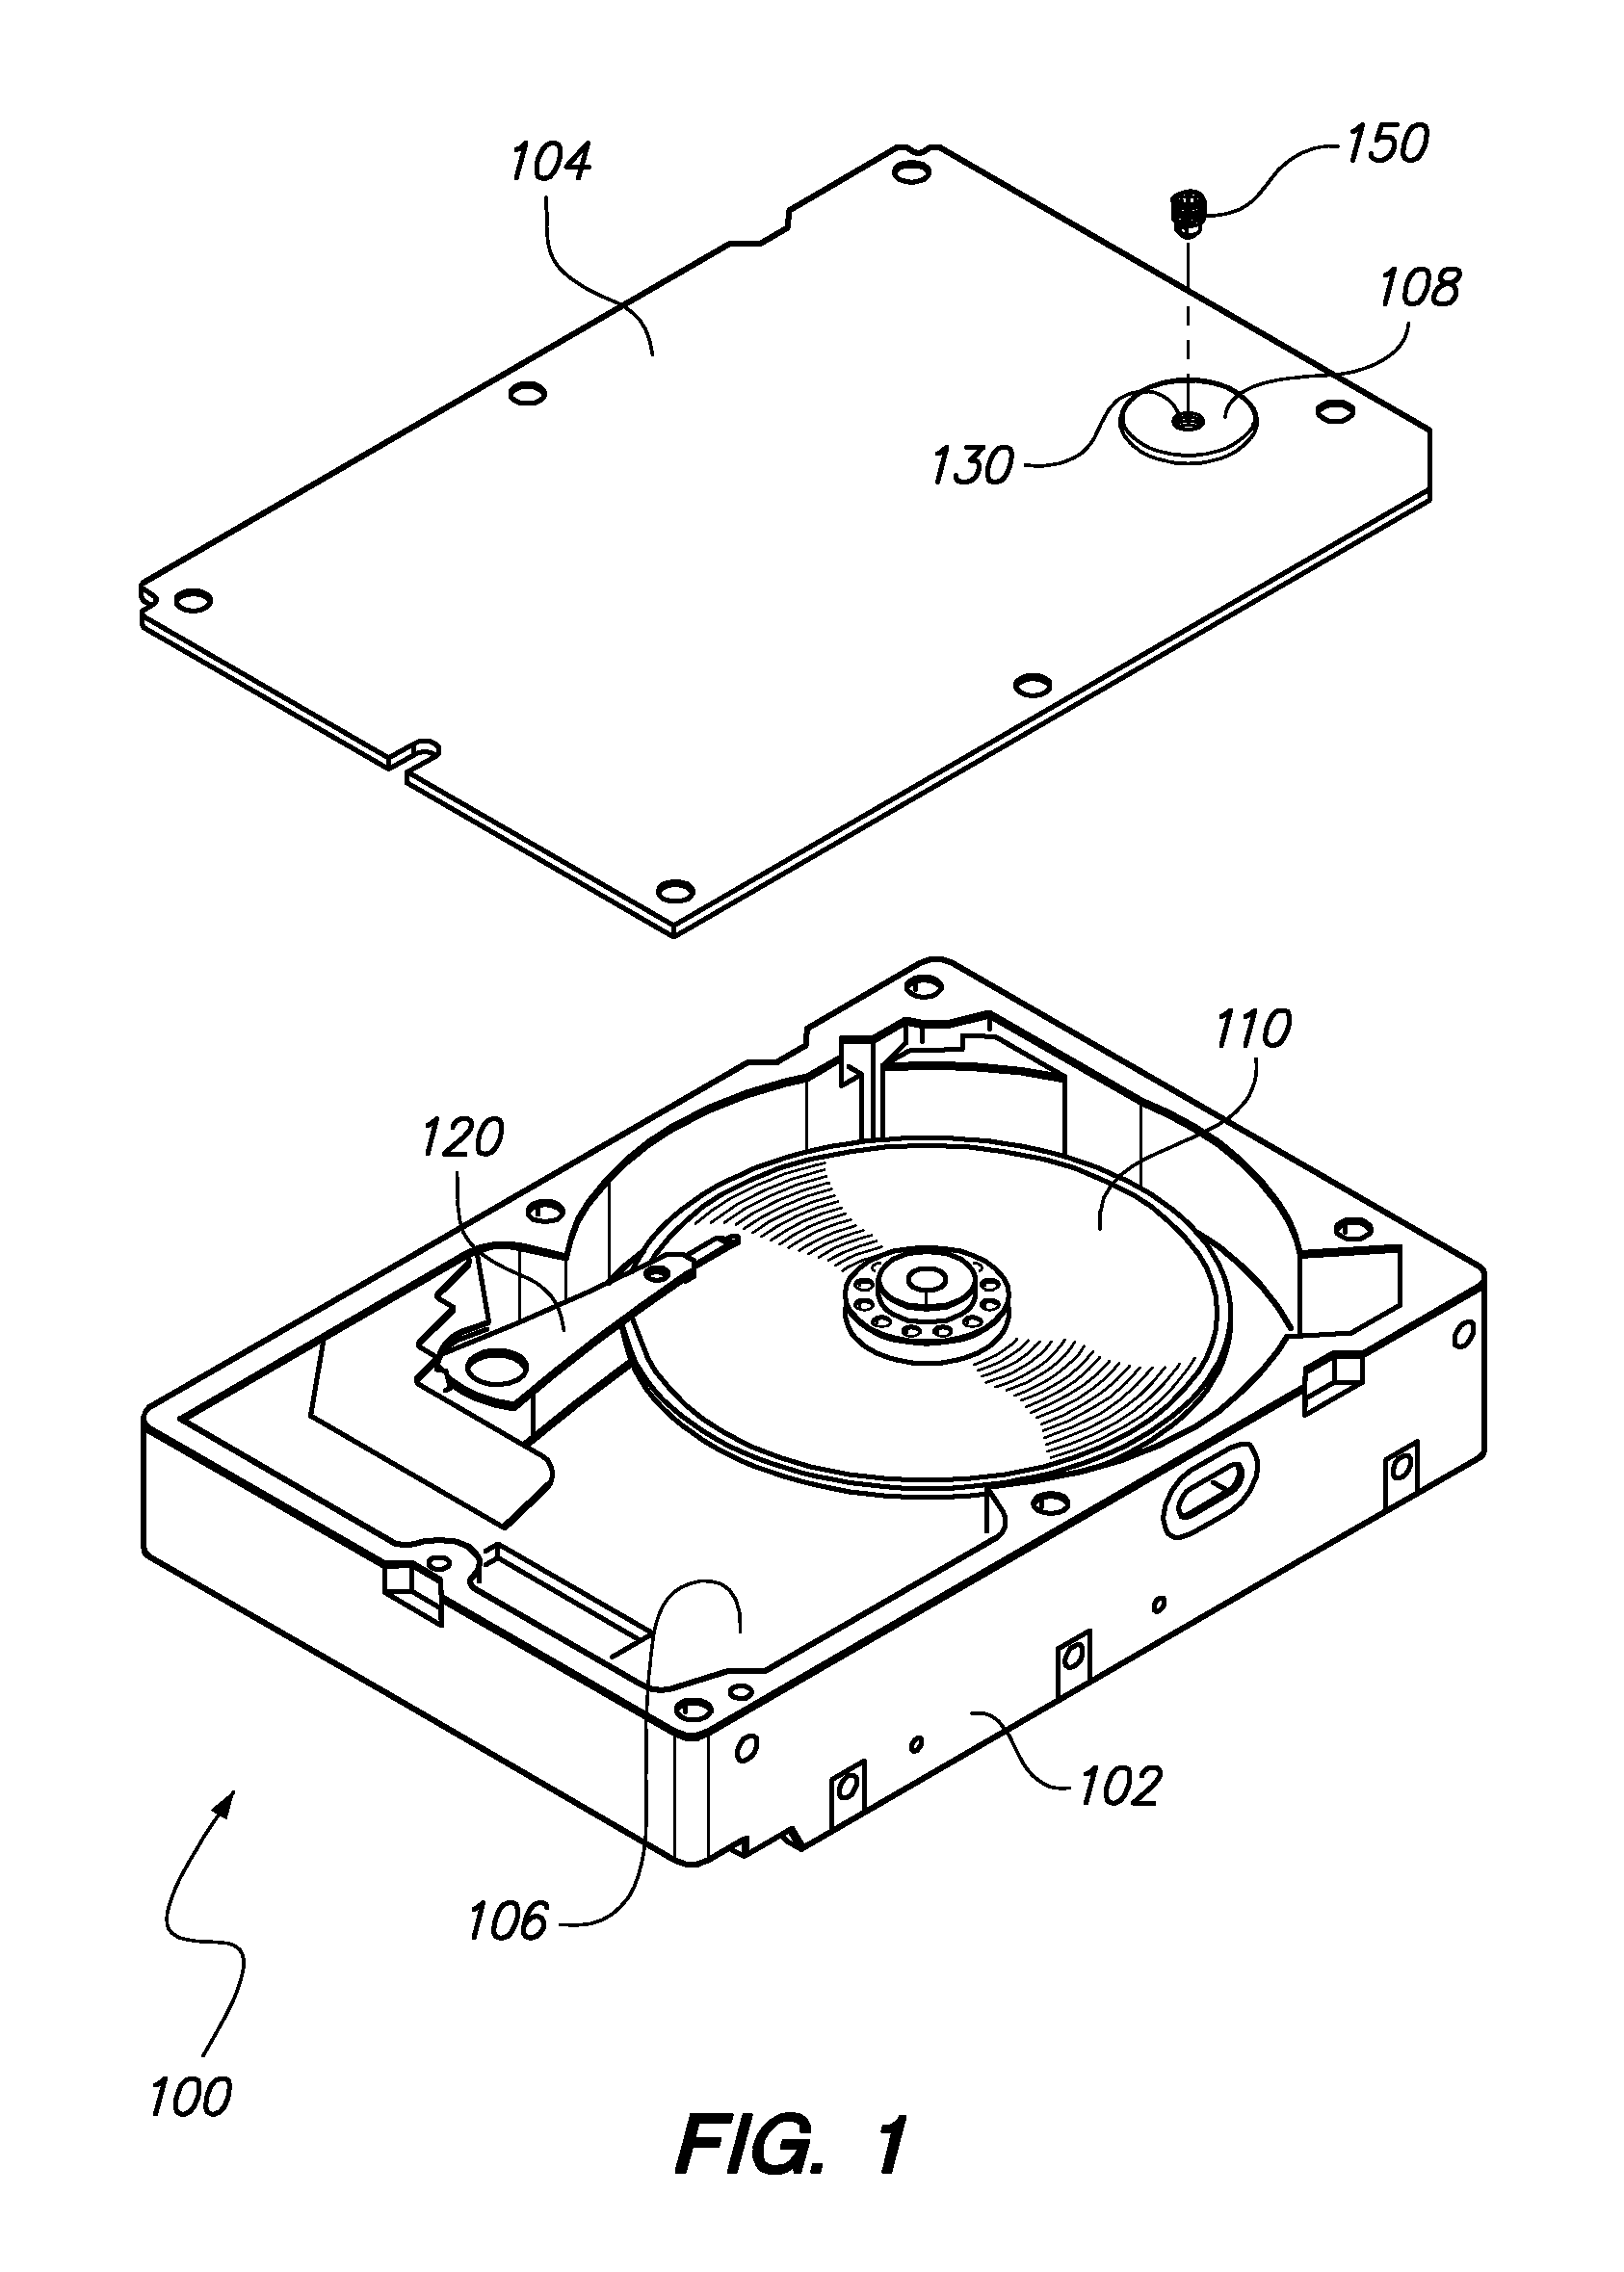 Hermetically sealed disk drive with fill port valve